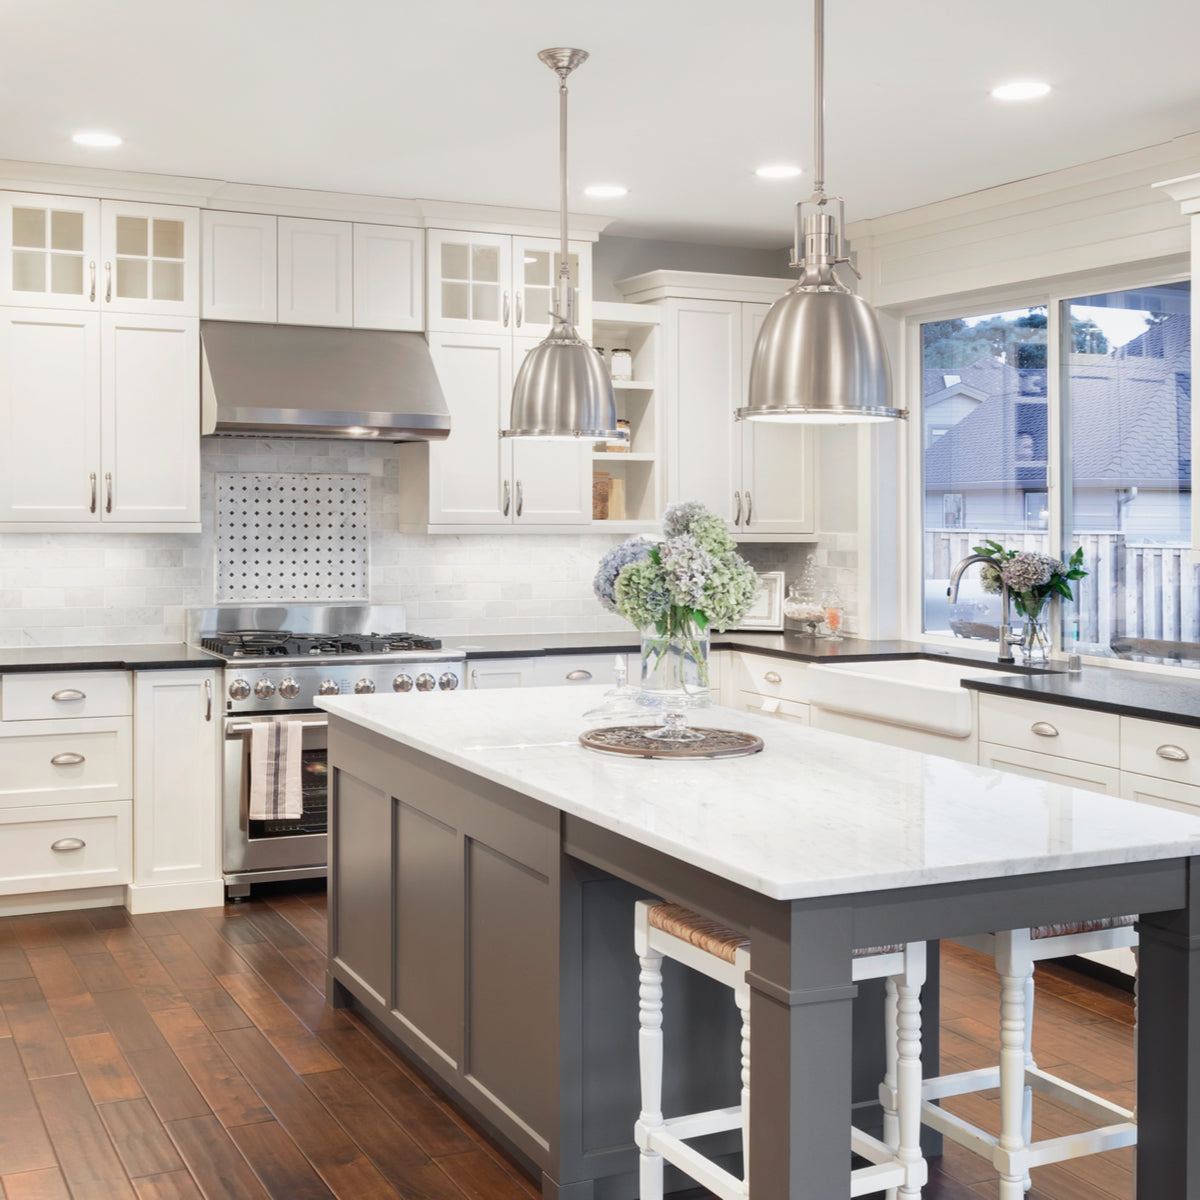 Does Your Kitchen Need a Refresh? Modest Budget Remodel Ideas